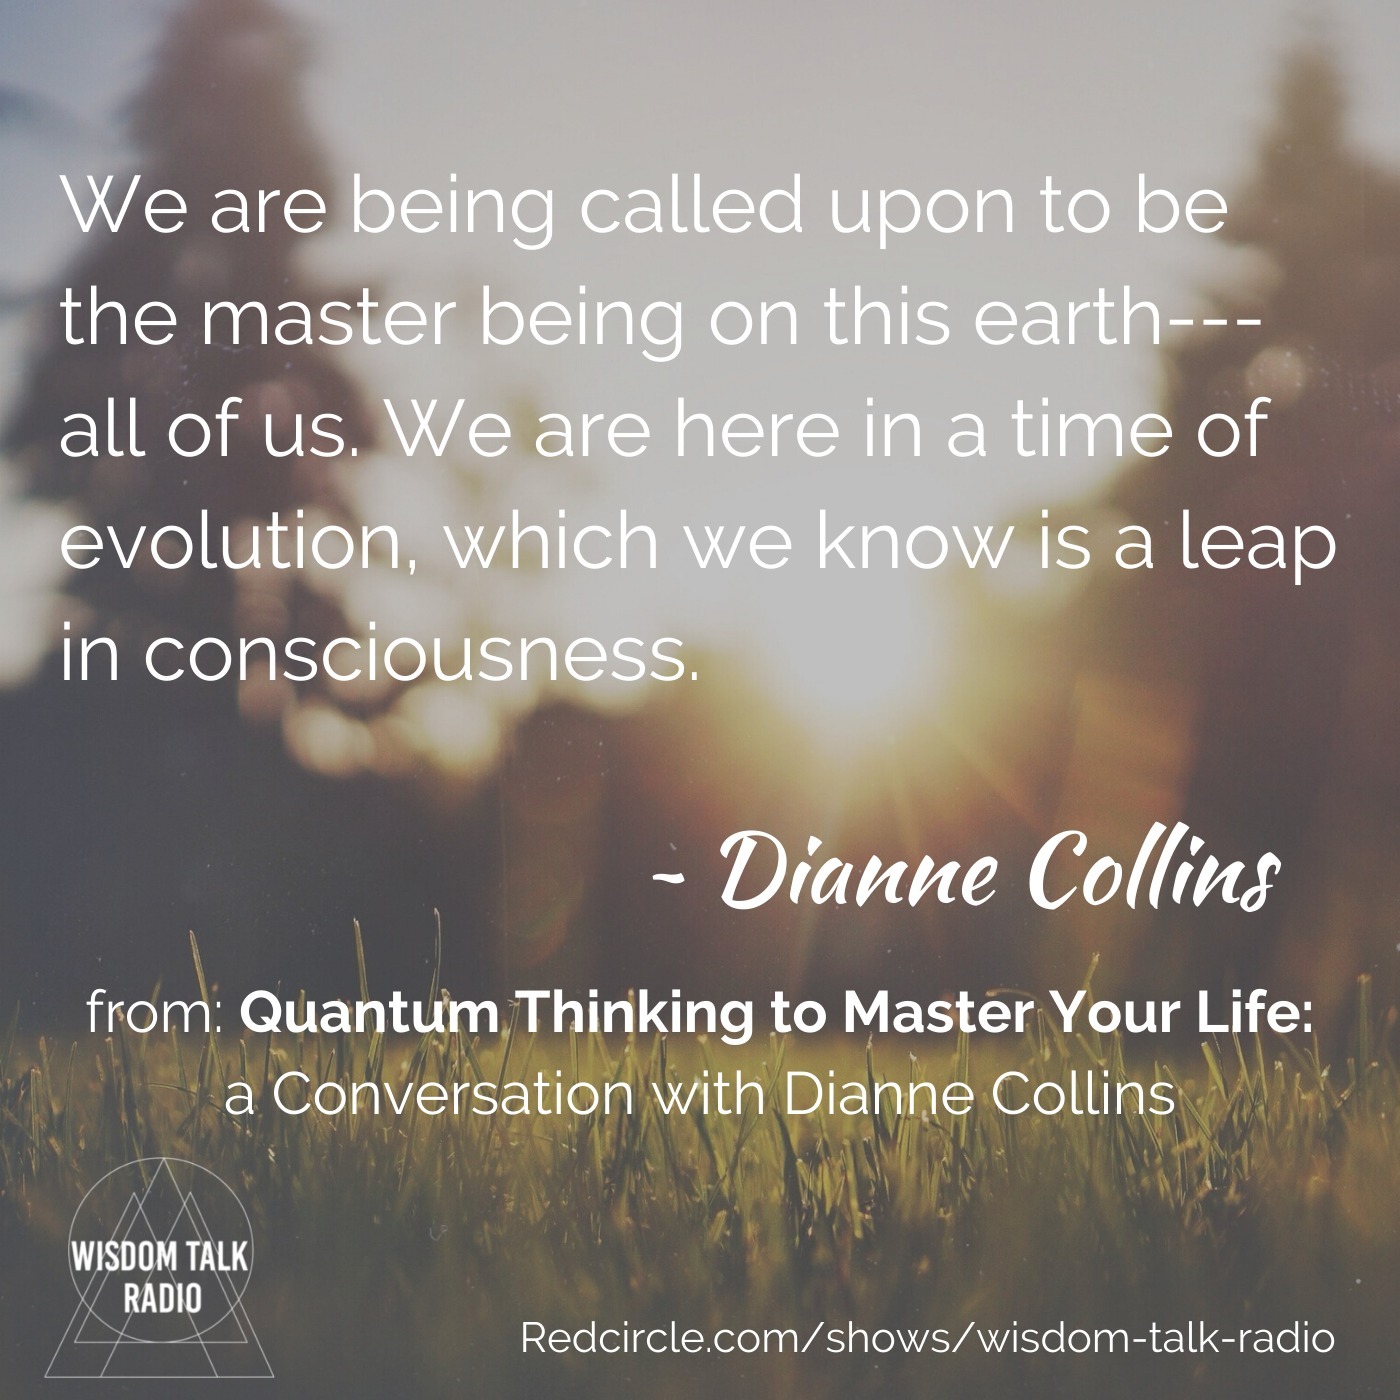 Quantum Thinking to Master Your Life: a conversation with Dianne Collins